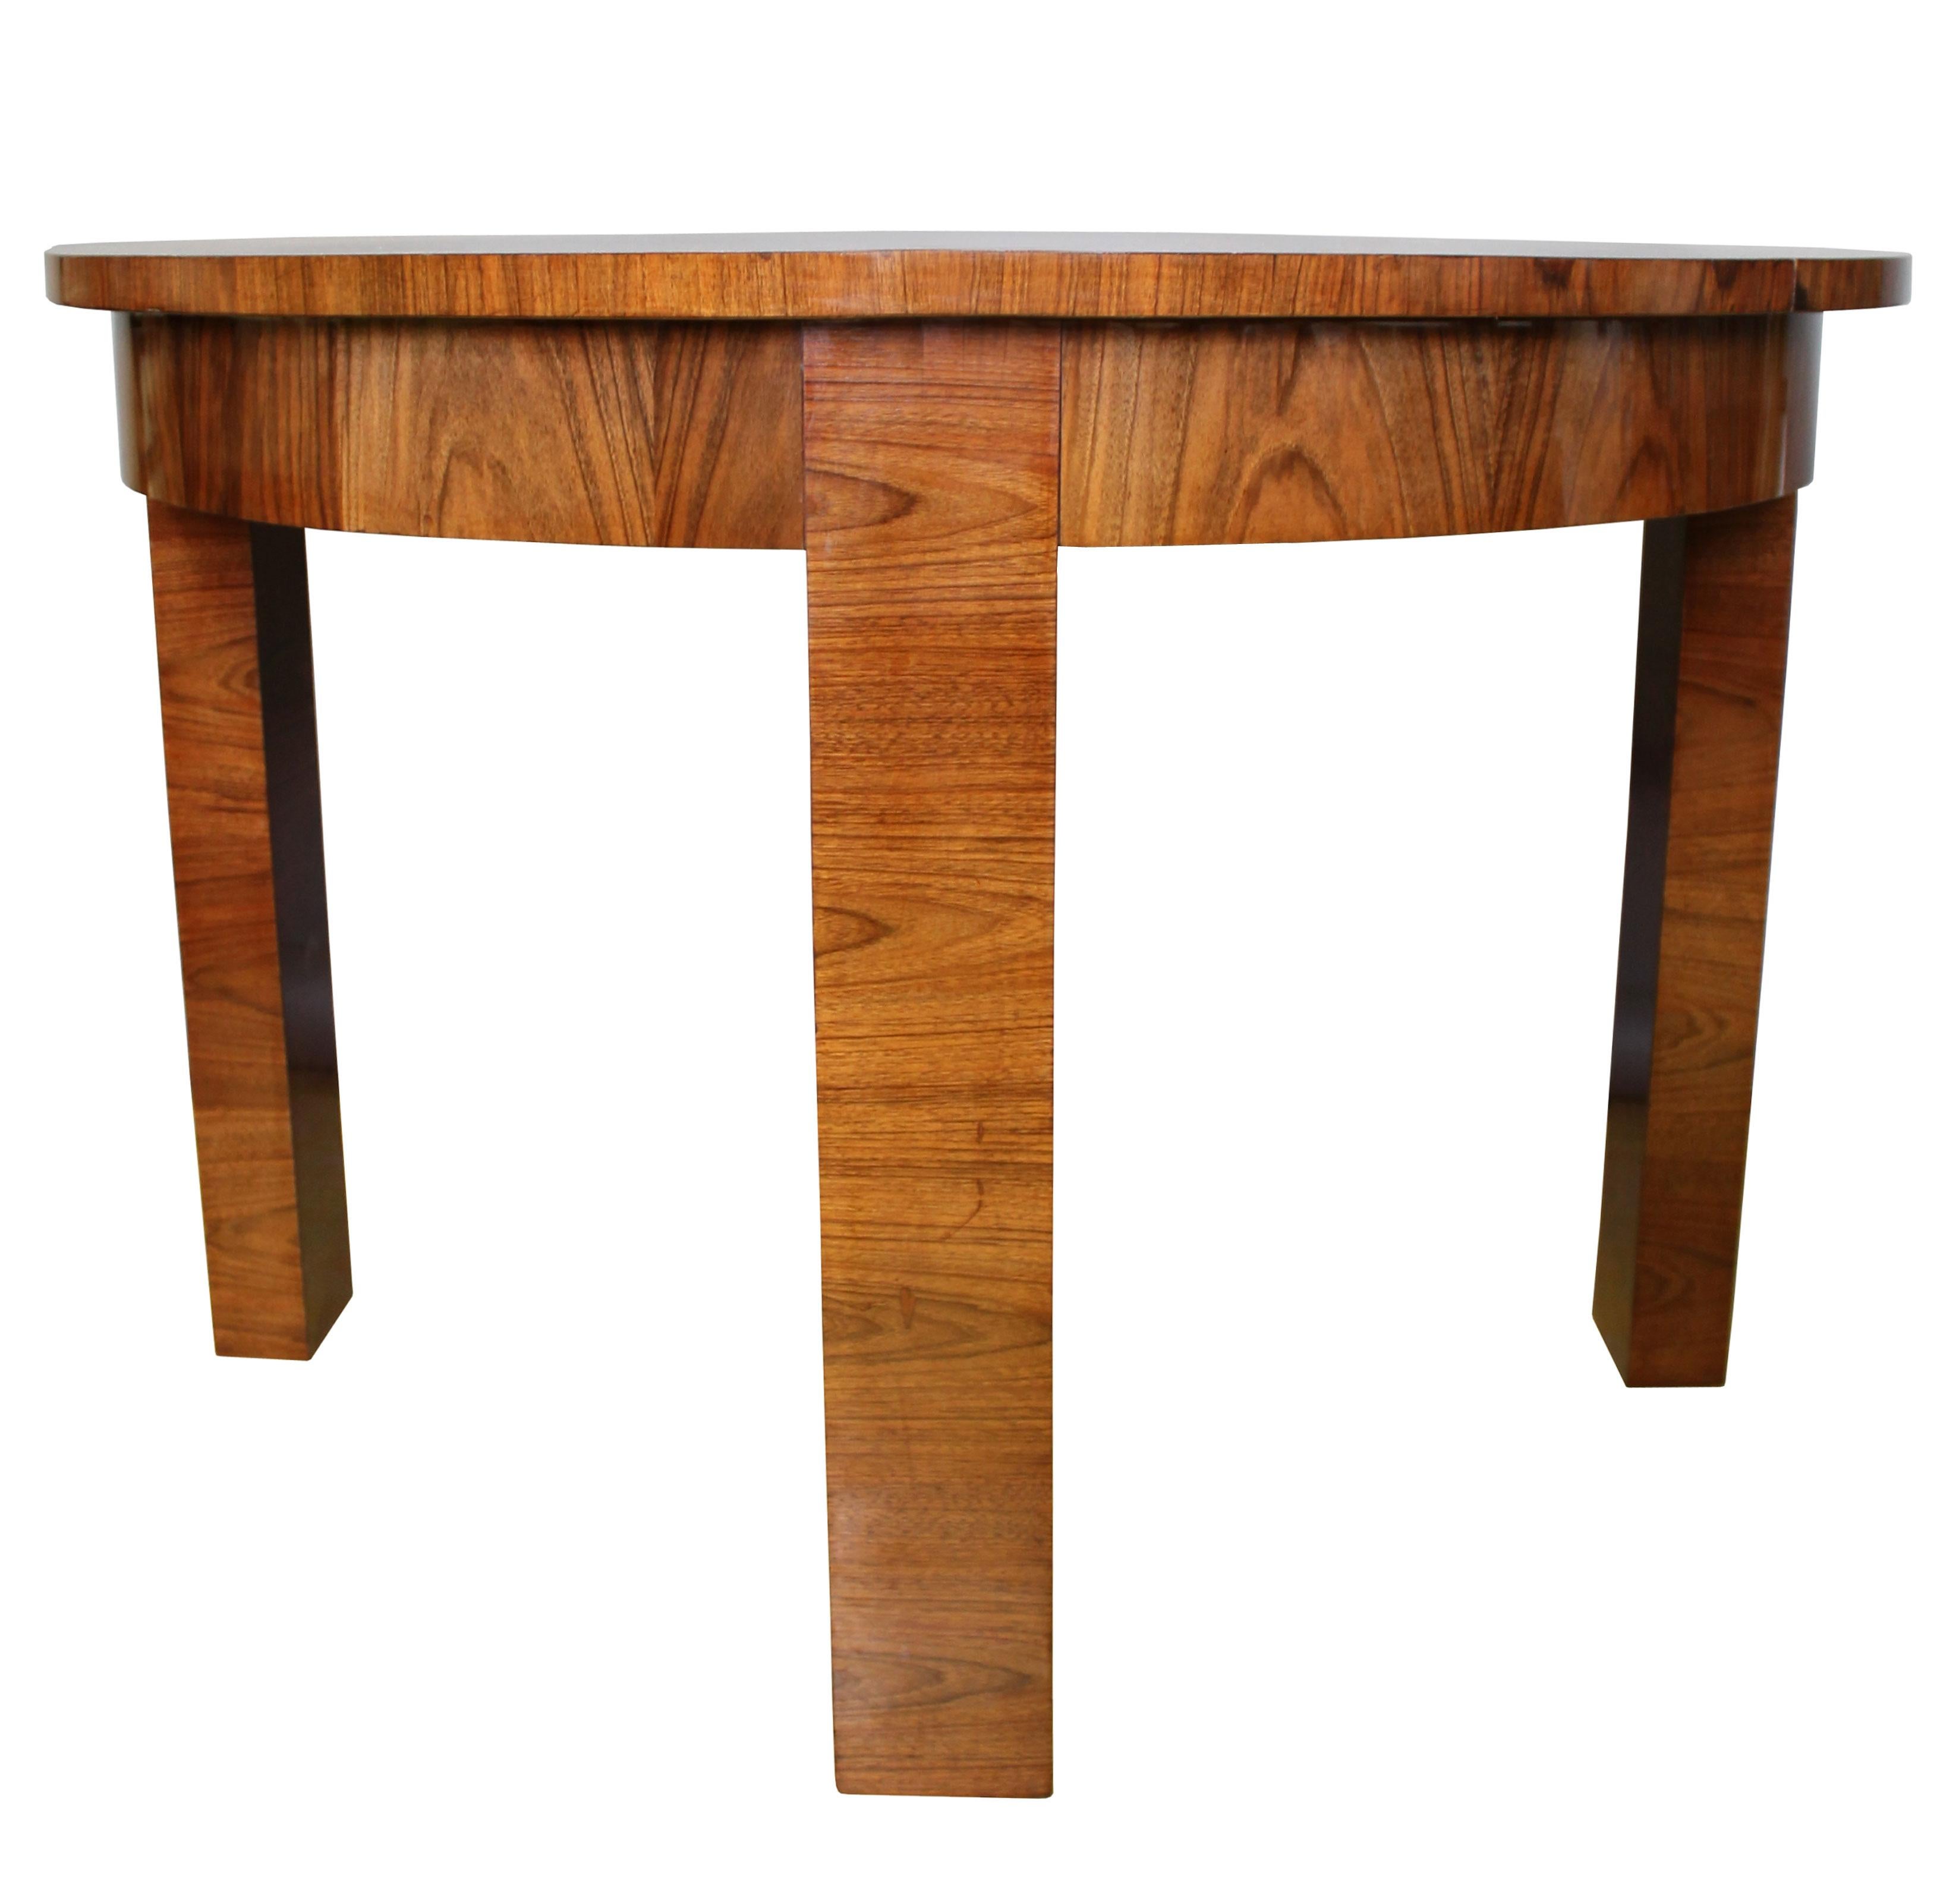 An original Modernist dining table from the 1930s. This table has a dignified design with stylish proportions together and a dazzling Walnut pattern to the table top and also the legs.

This piece was sourced in Brno, Czech Republic. It is